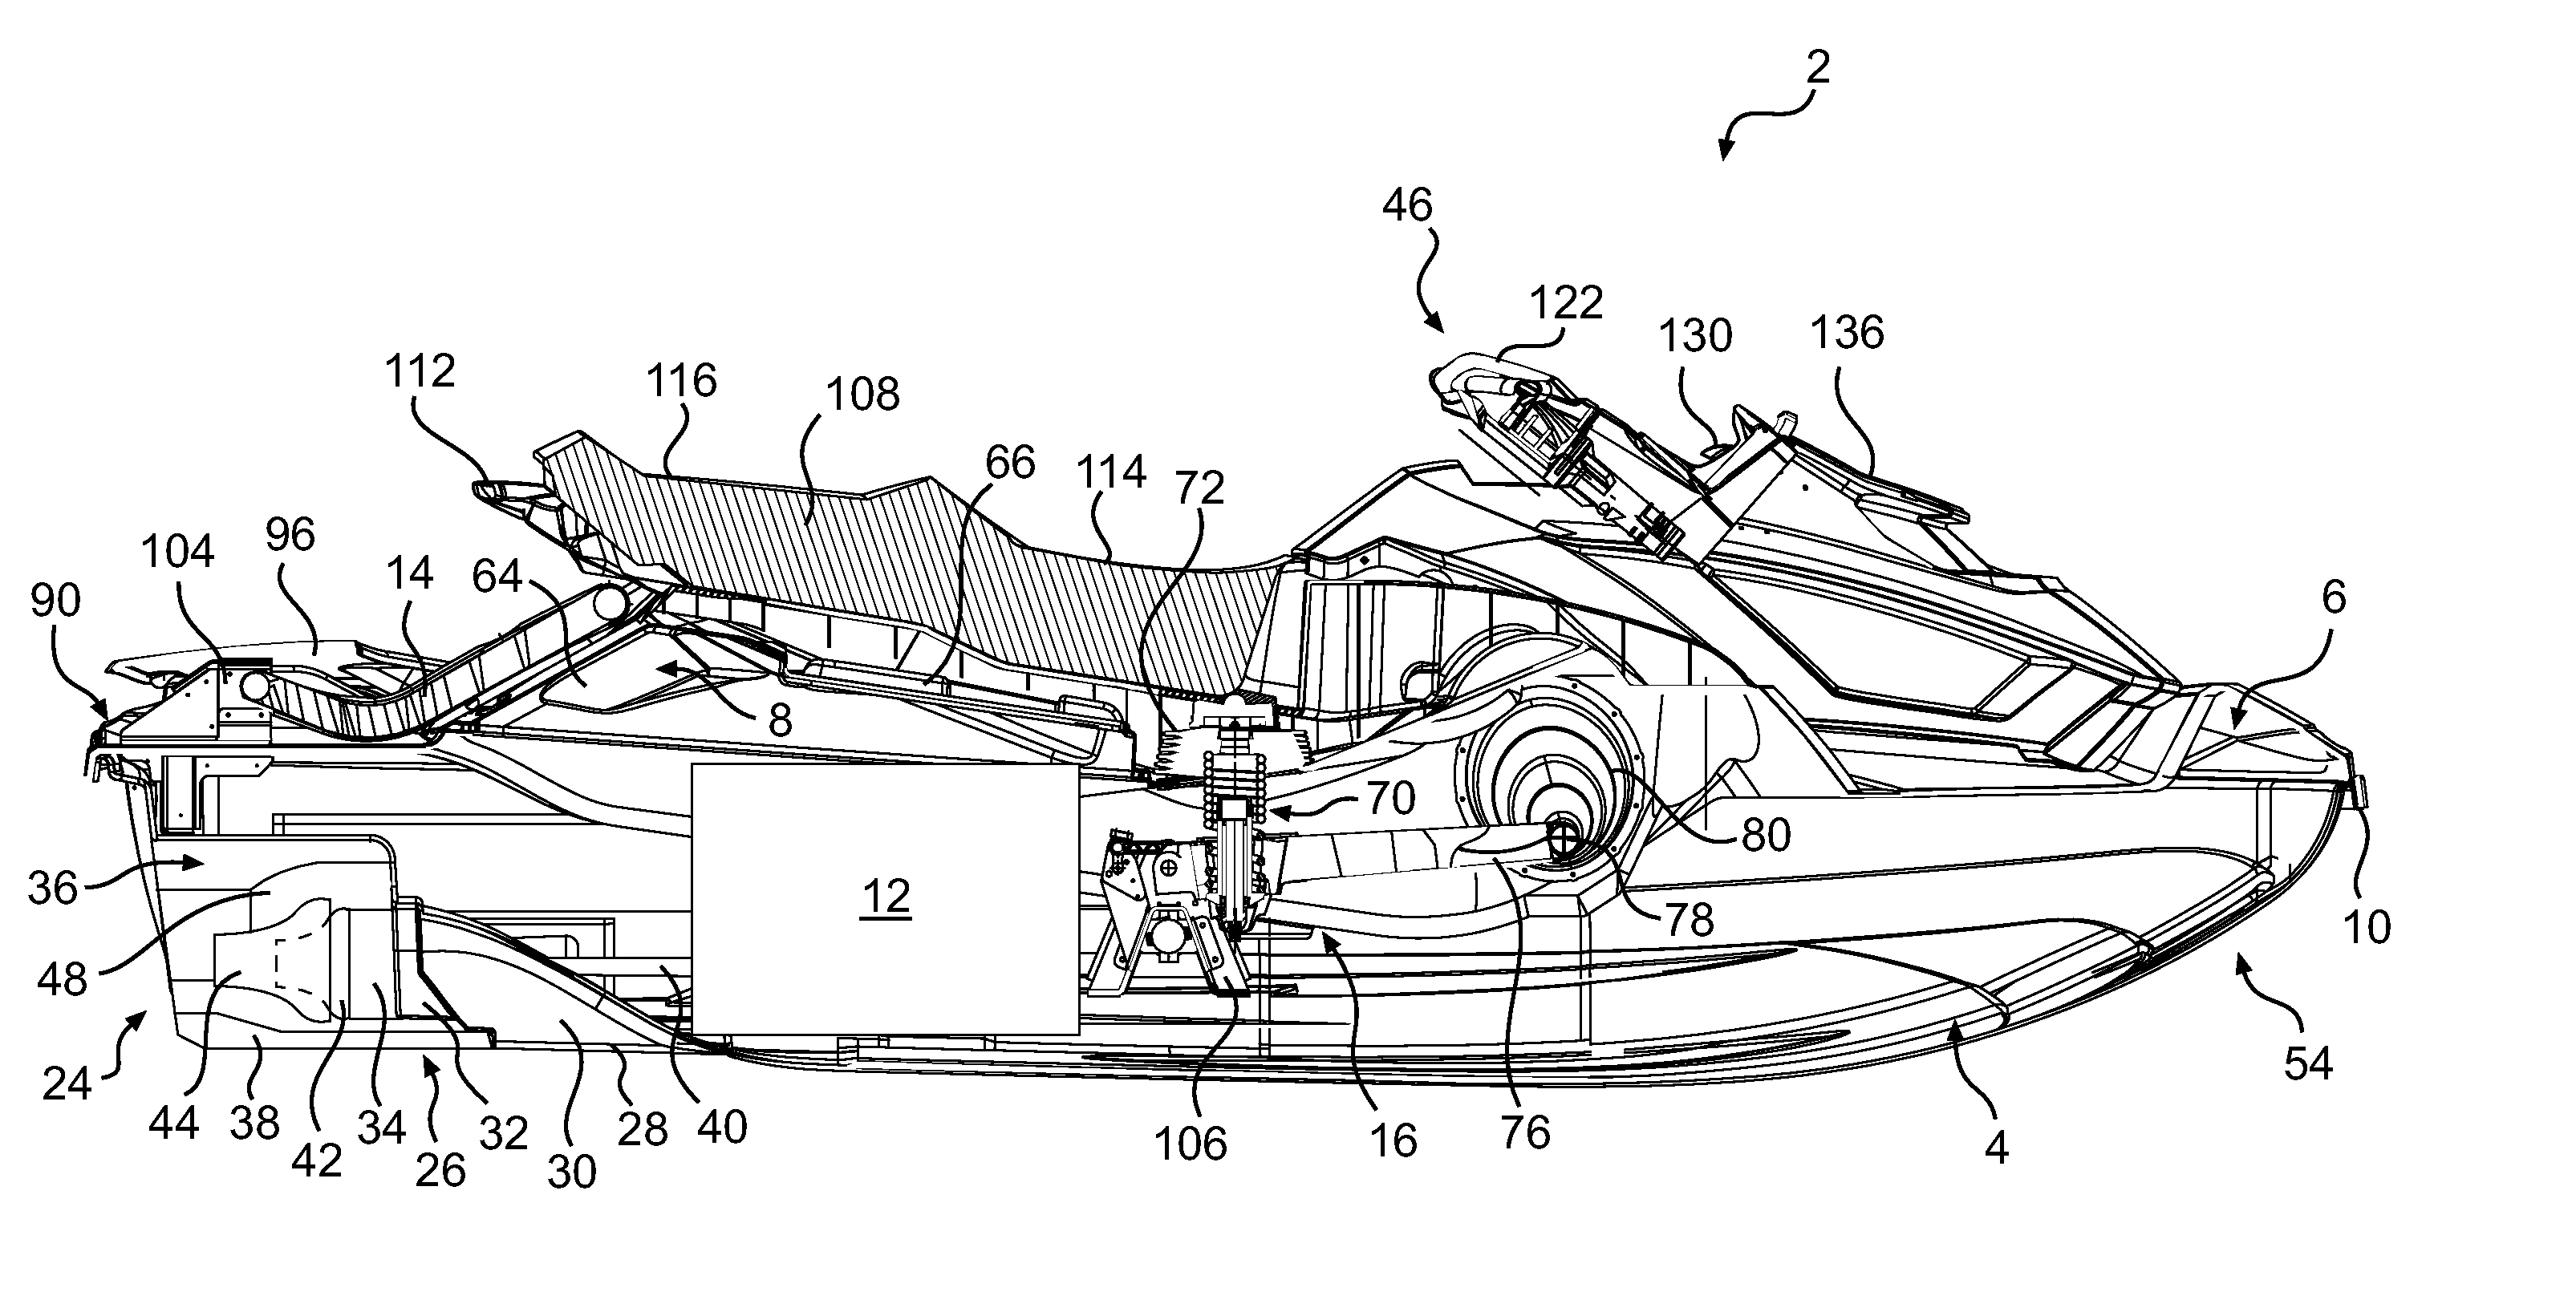 Personal watercraft with pivotable seat